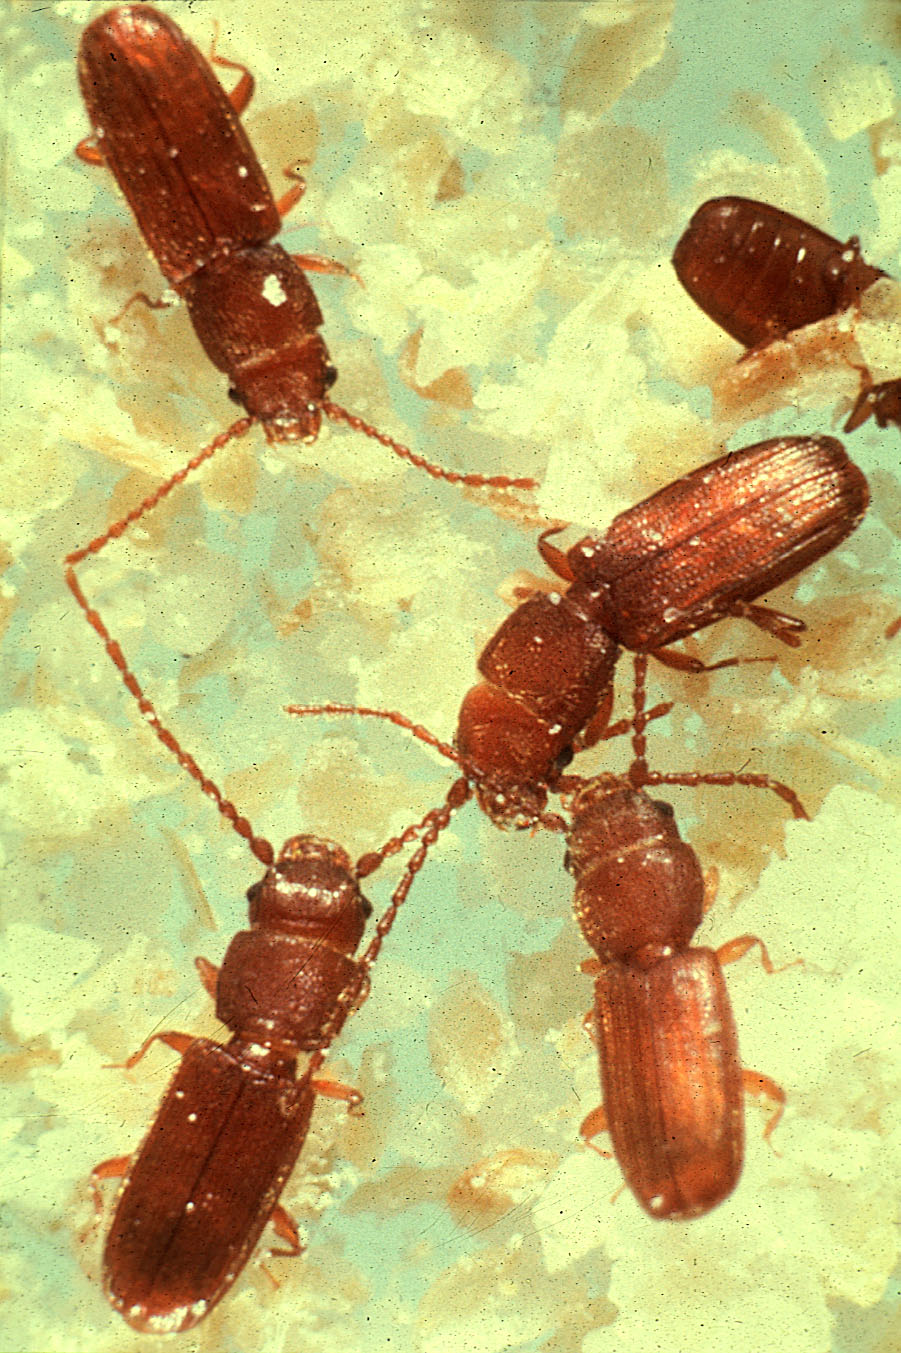 Figure 1 is a close up photo of flat grain beetles, Cryptolestes spp.